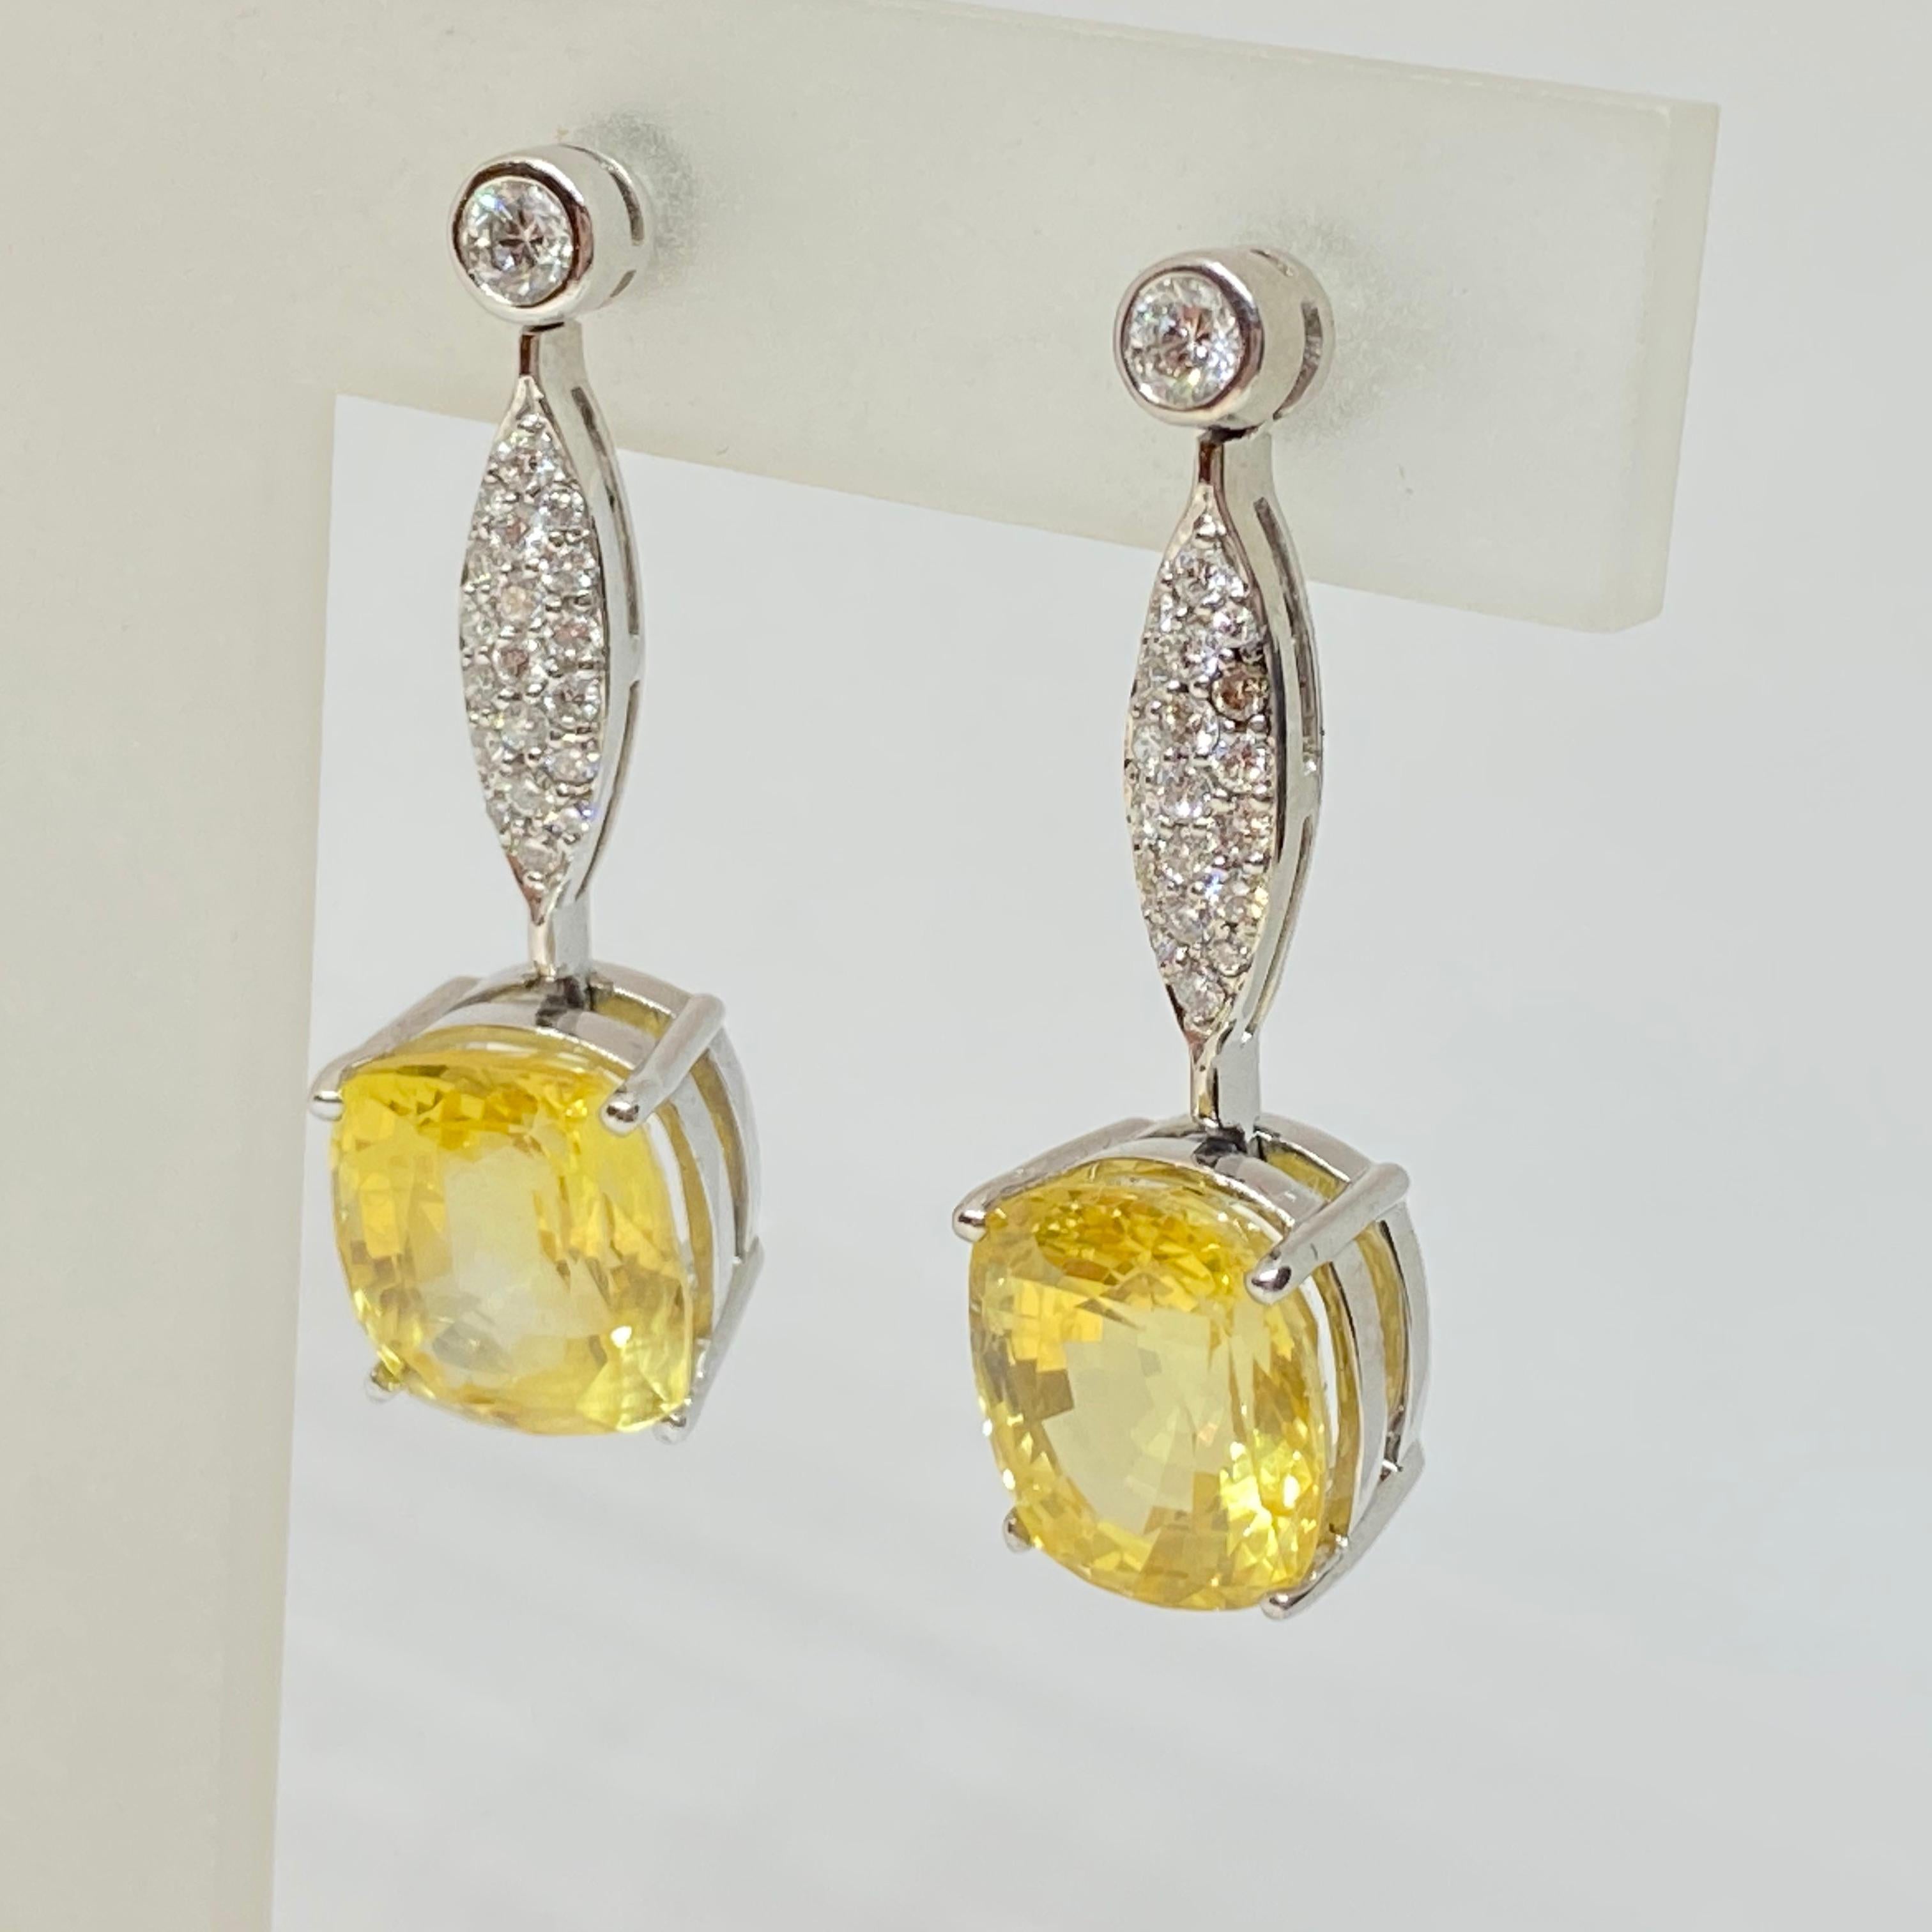 Natural NO HEAT Yellow Sapphire Oval Dangle Drop Diamond Earrings 18KW 16.60CTW
Lovely estate dangle drop earrings designed in 18 karat white gold. NO HEAT, untreated light canary natural yellow sapphires suspended from a pave & bezel diamond drop